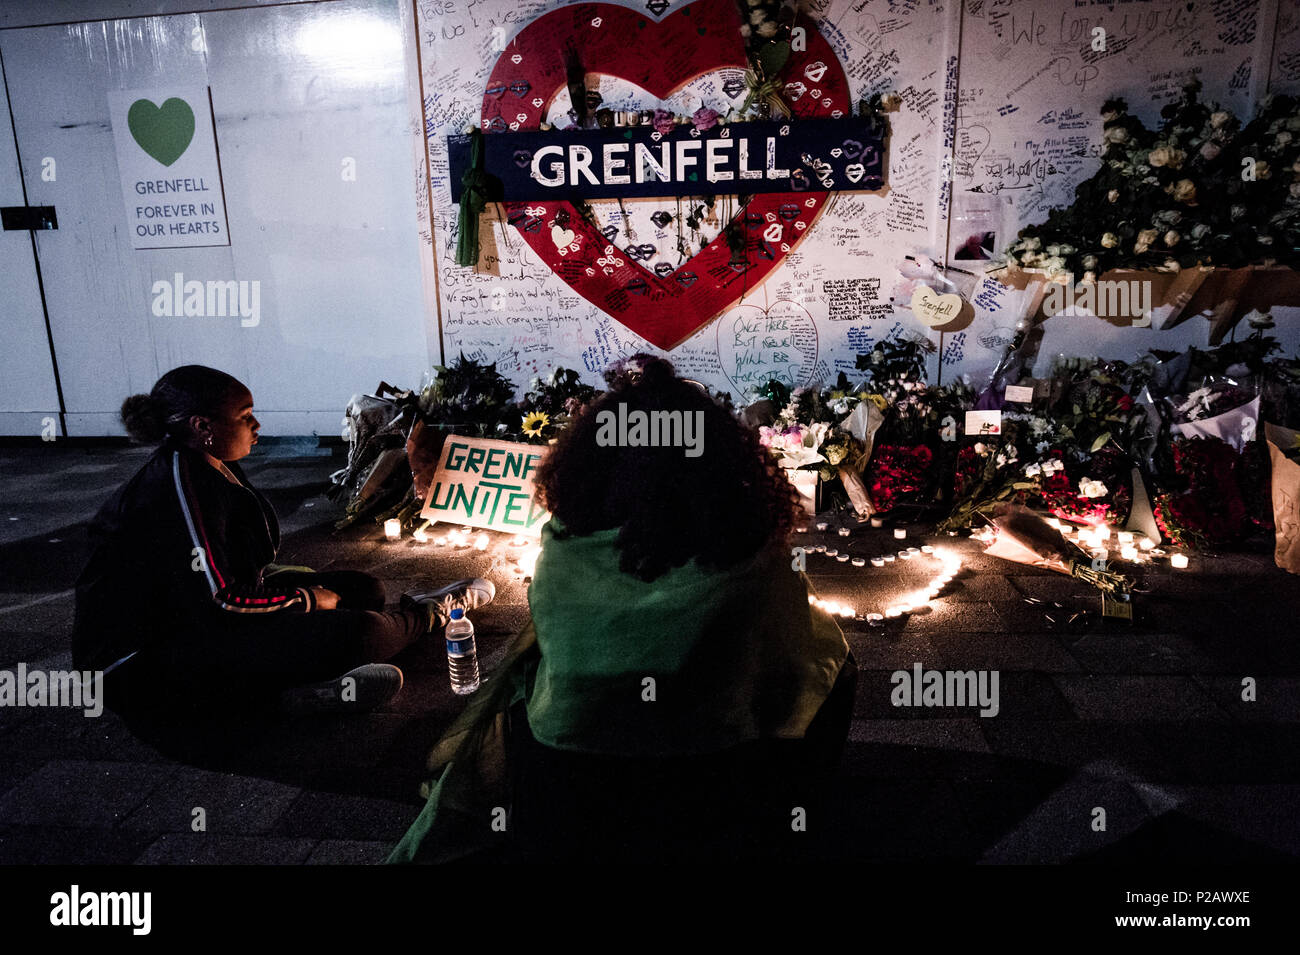 London, UK. 14th June, 2018. A woman seen standing in front of the flowers memorial at the foot of the Grenfell Tower.On the first anniversary of the Grenfell Tower fire, which killed 72 people, the area around the tower has been filled with flowers, candles and messages to remember those who lost their lives. Credit: Brais G. Rouco/SOPA Images/ZUMA Wire/Alamy Live News Stock Photo